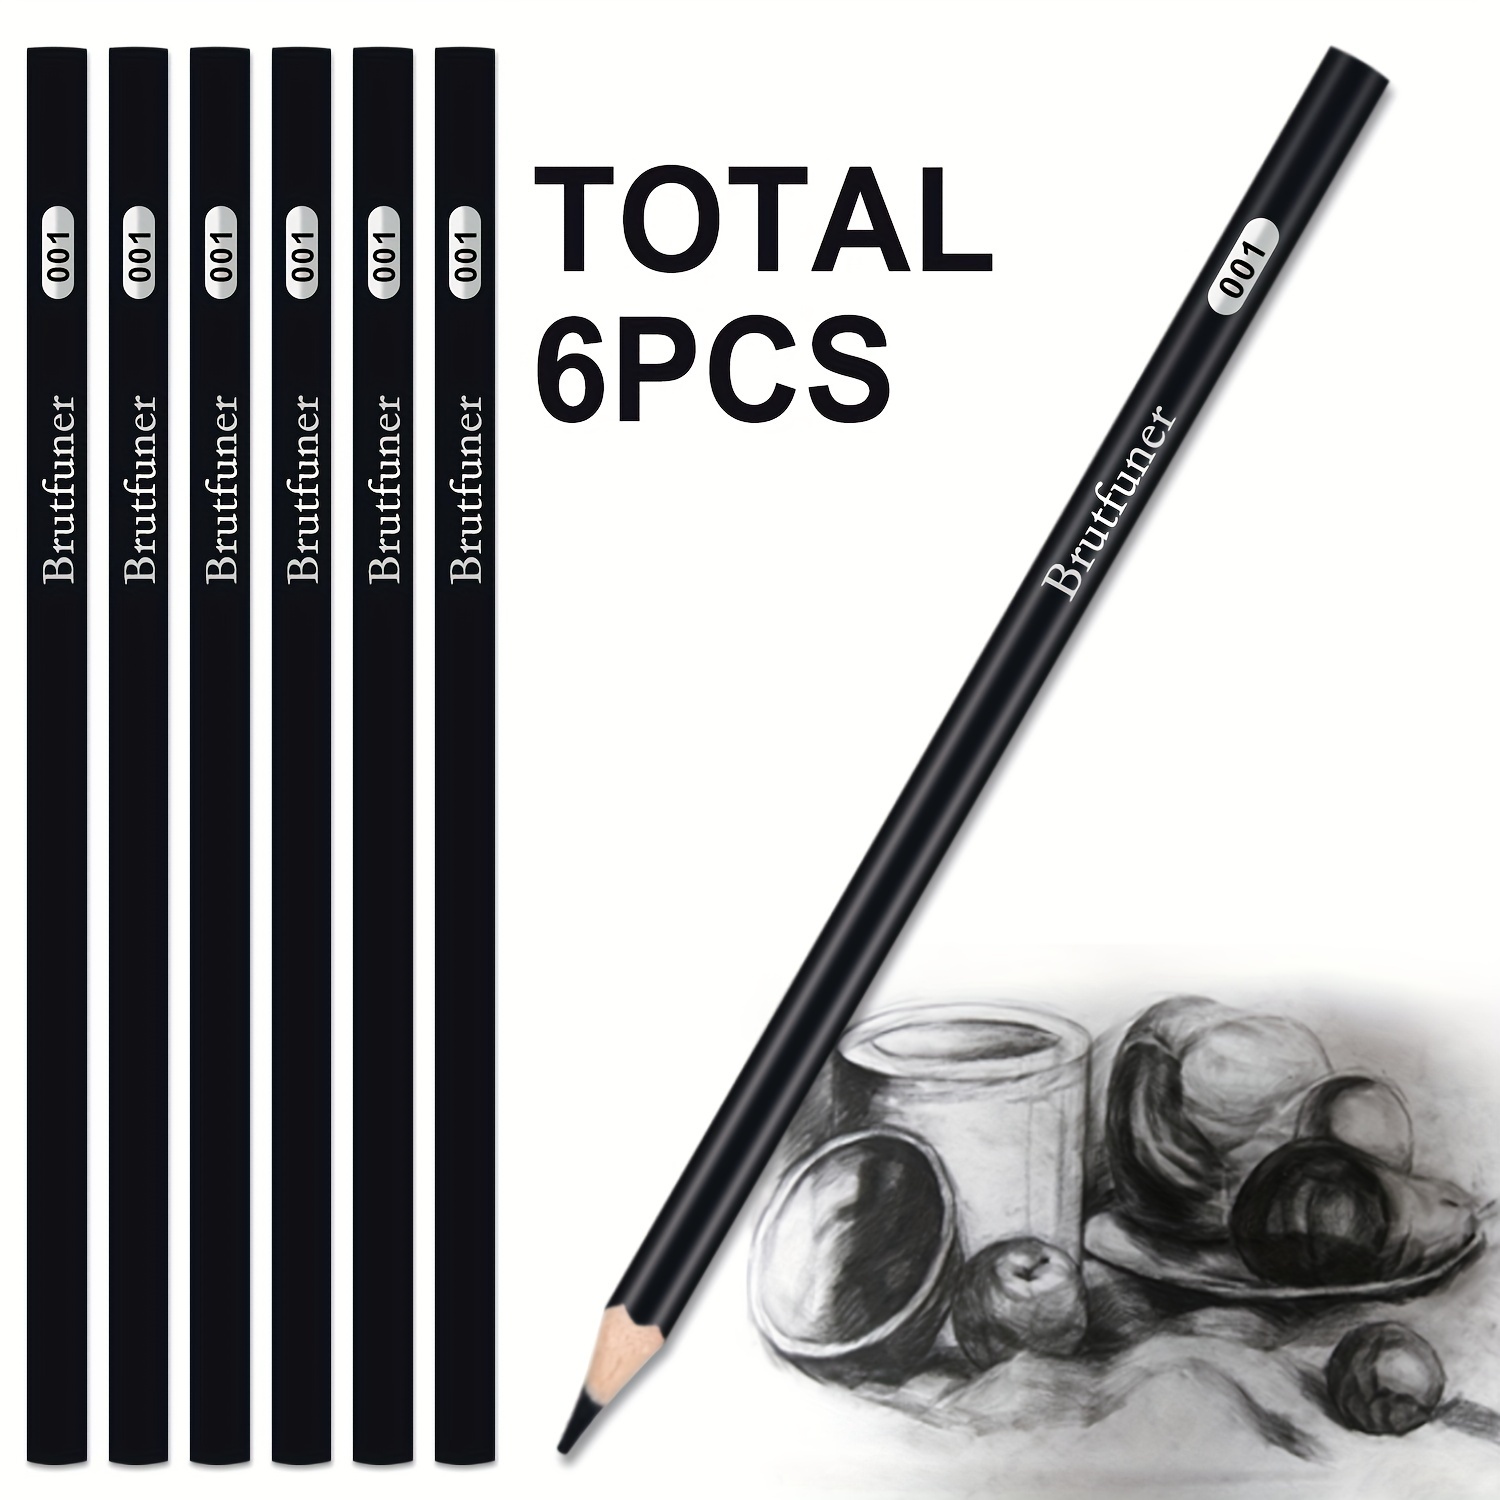 White Charcoal Pencils Drawing Sketch Highlight White - Temu